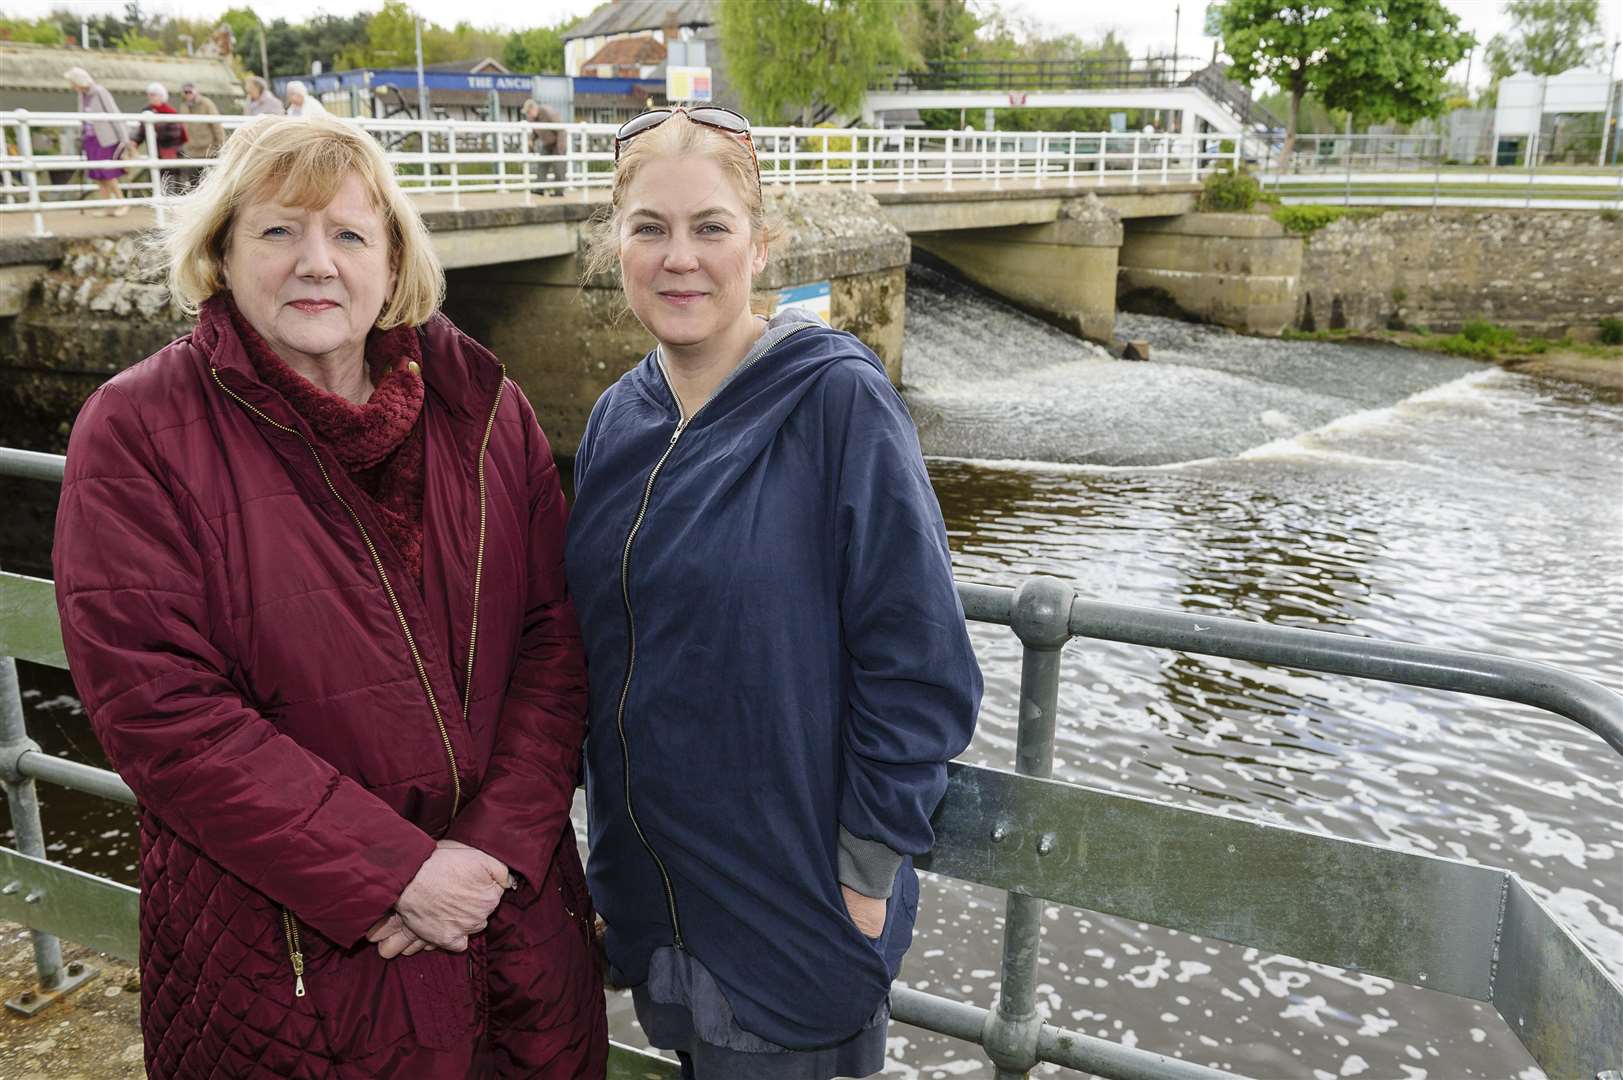 Geraldine Brown, council chairman, left, and Angela Gent, parish clerk at the weir. Both are warning of the dangers of getting in the water